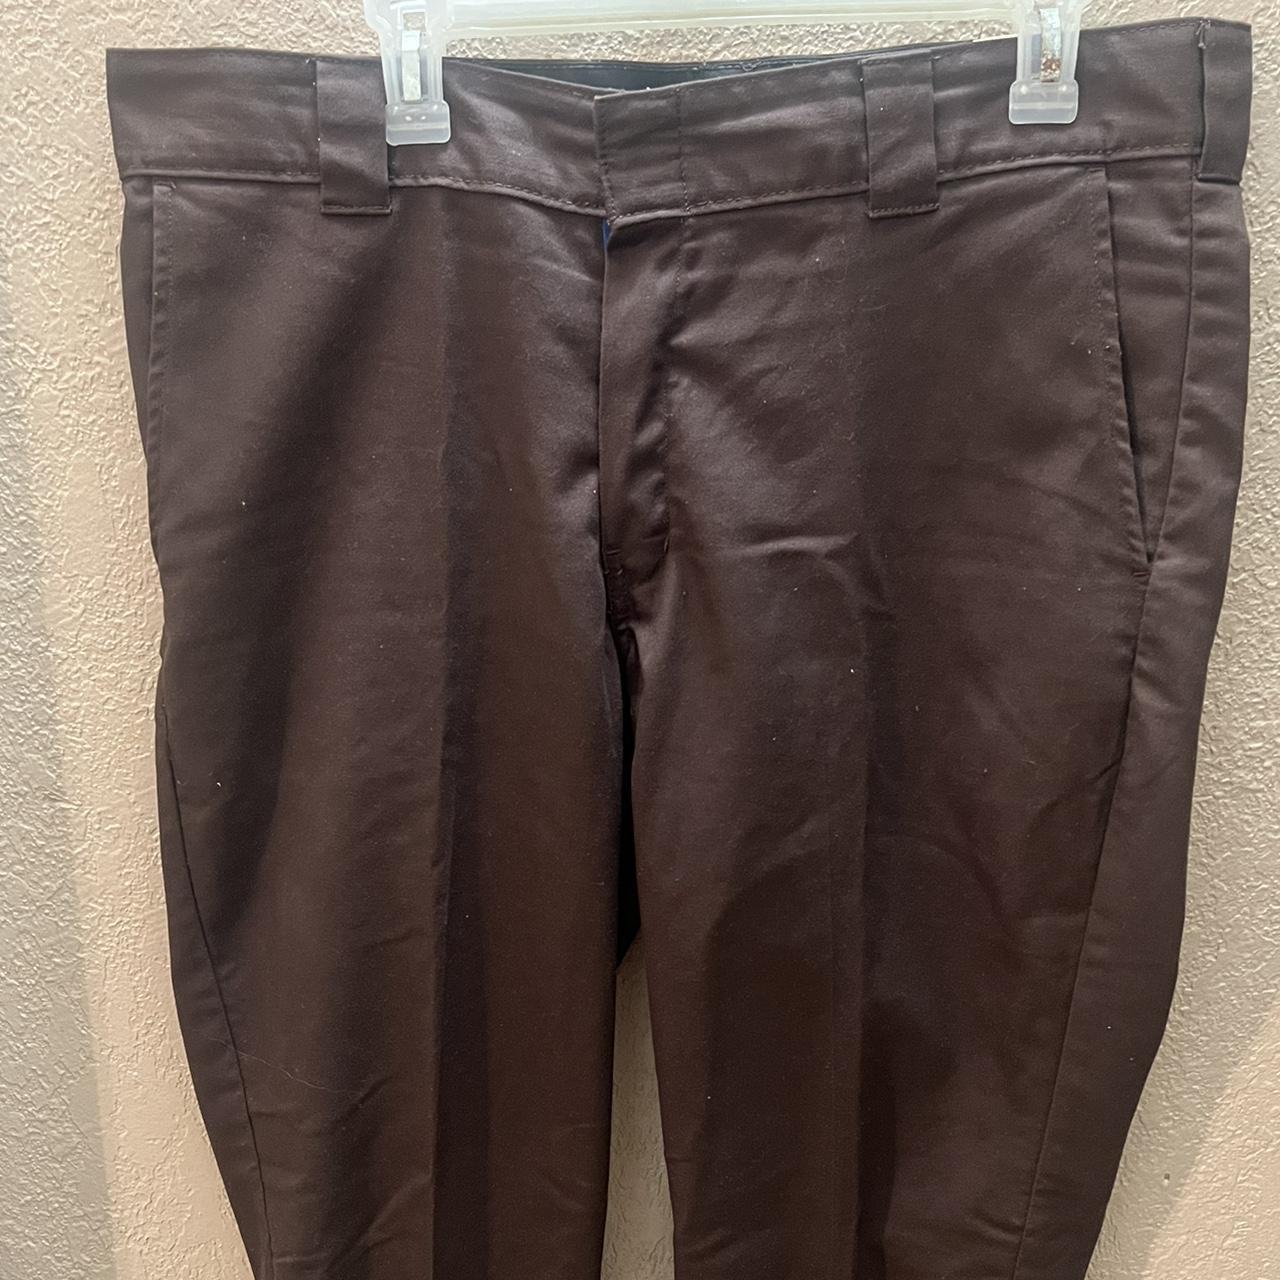 Brown dickies size 36 can fit 34 also - Depop